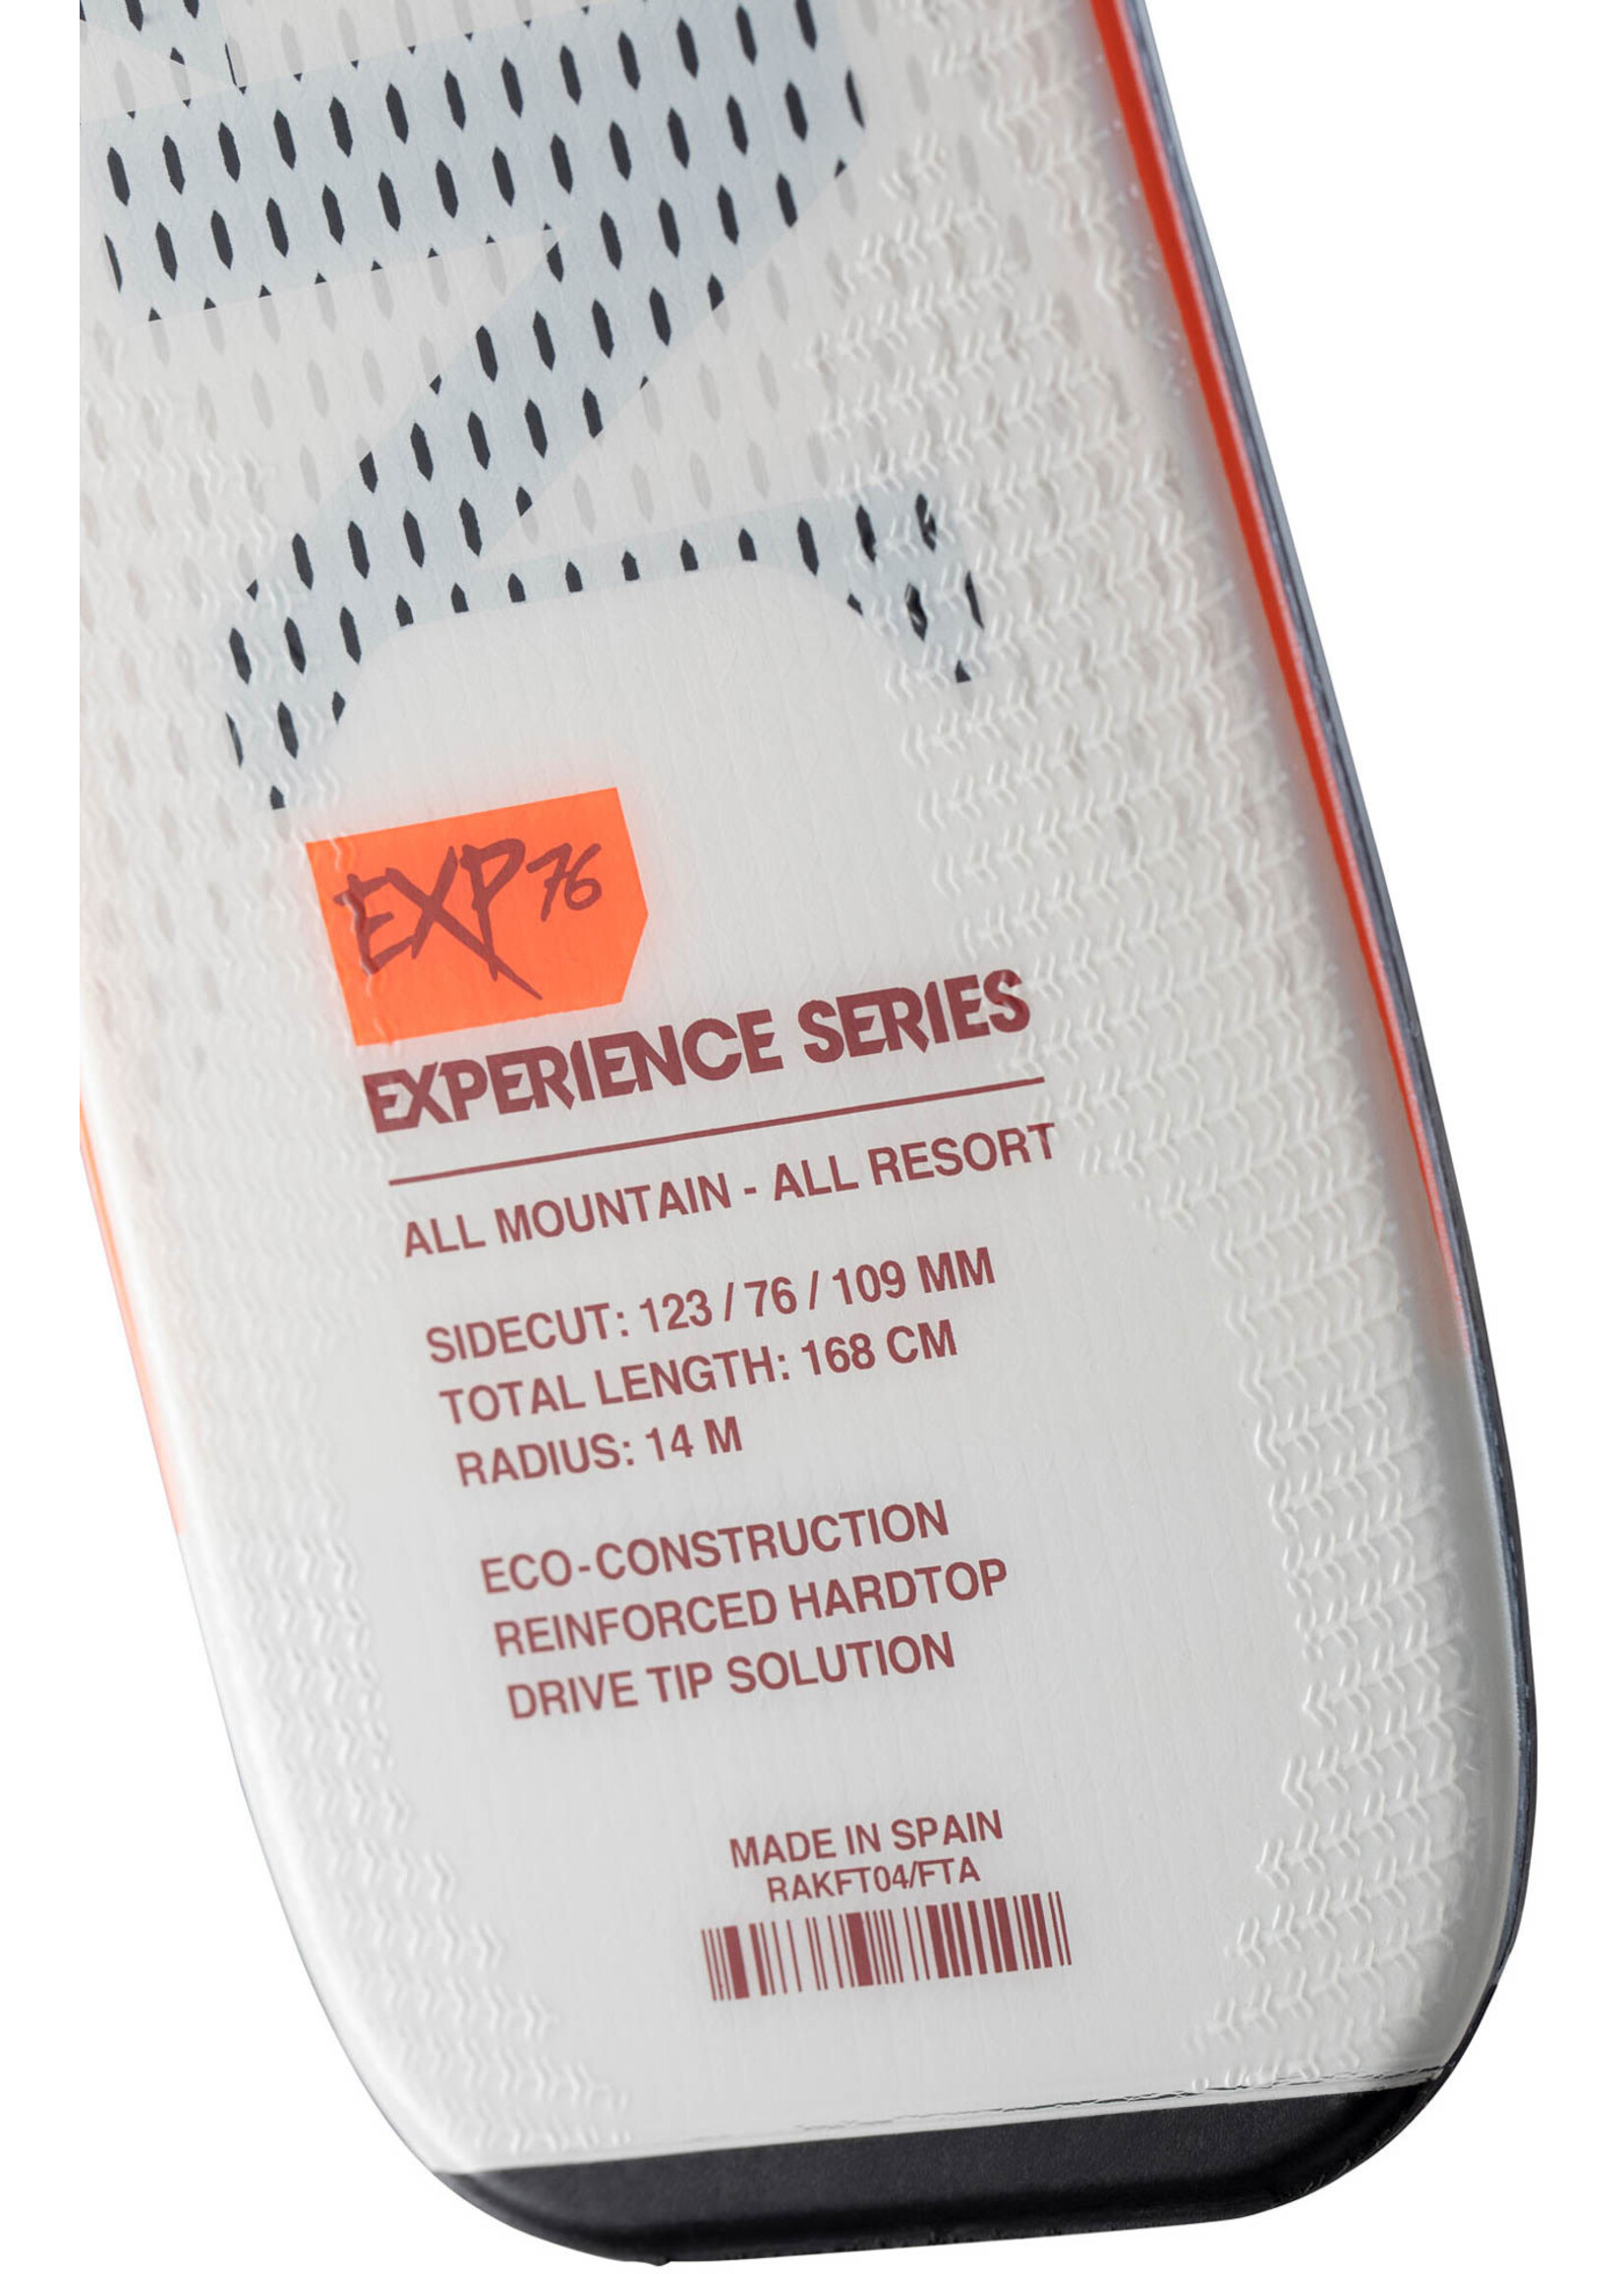 Rossignol EXPERIENCE 76 XPRESS XP10